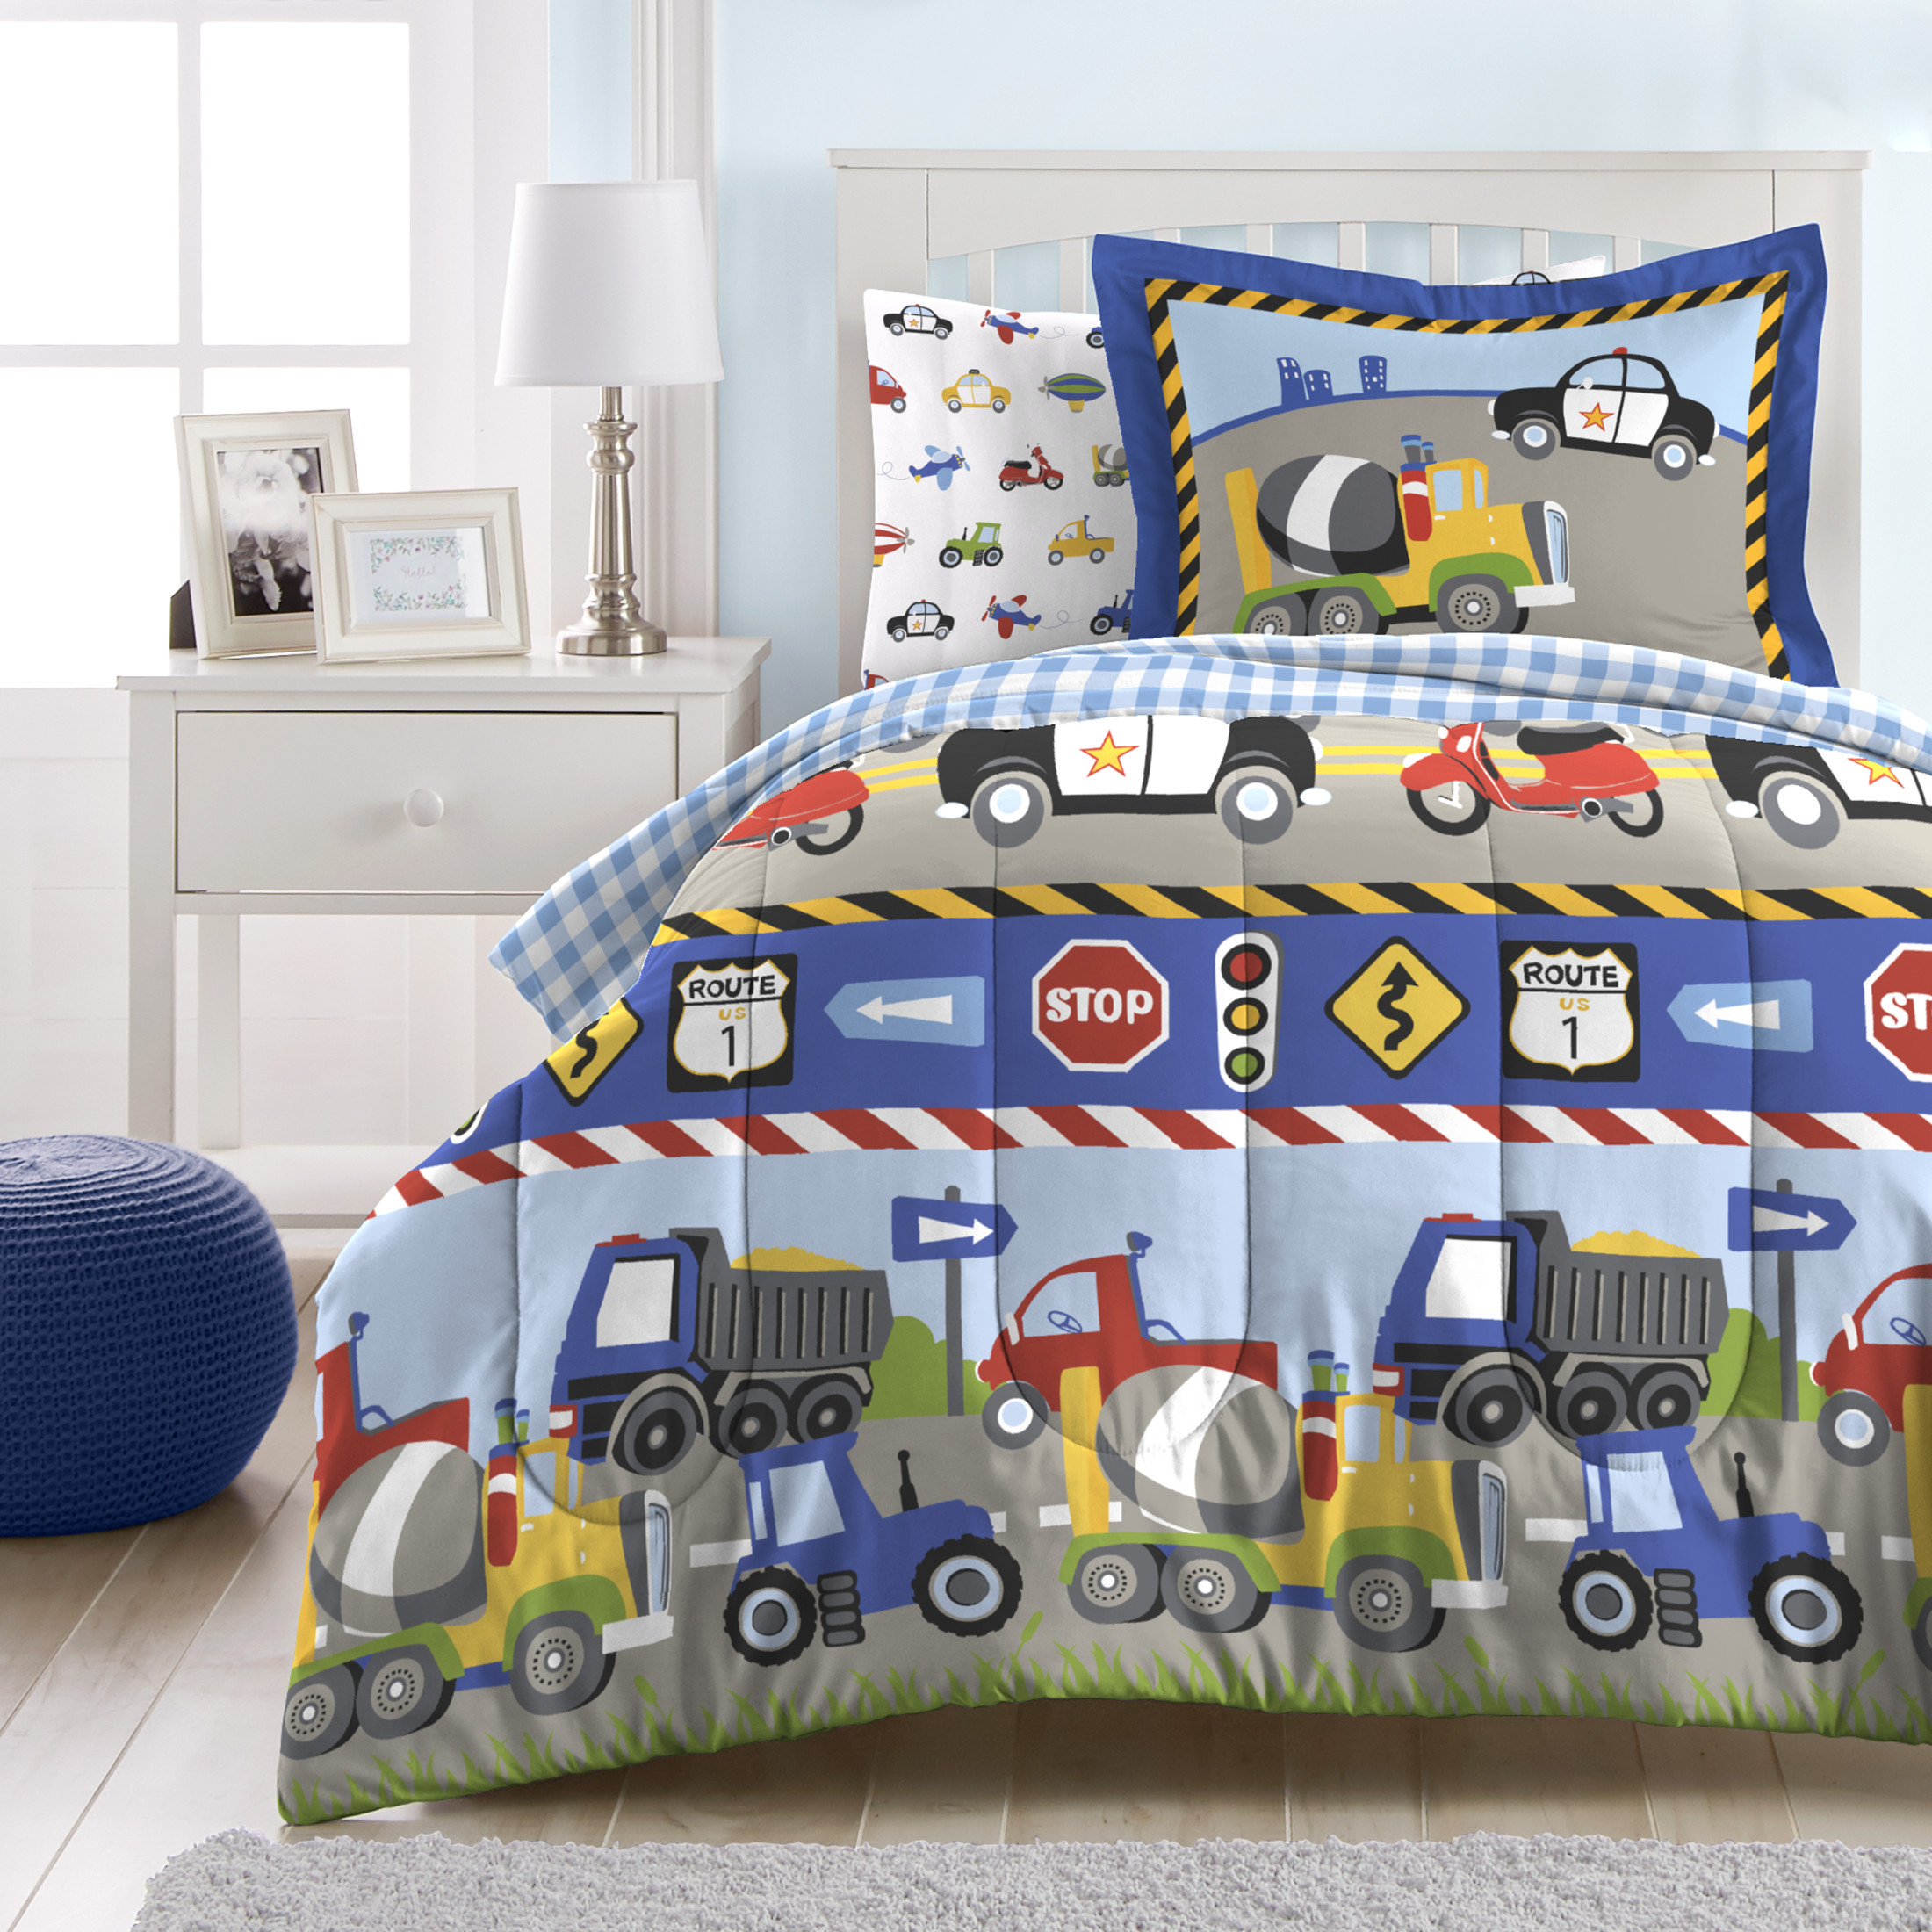 Dream Factory Trains and Truck Pattern Twin 5 Piece Bed-in-a-Bag, Bed-in-a-Bag, Cotton/Polyester, Blue, Multi, Male, Child - image 1 of 6